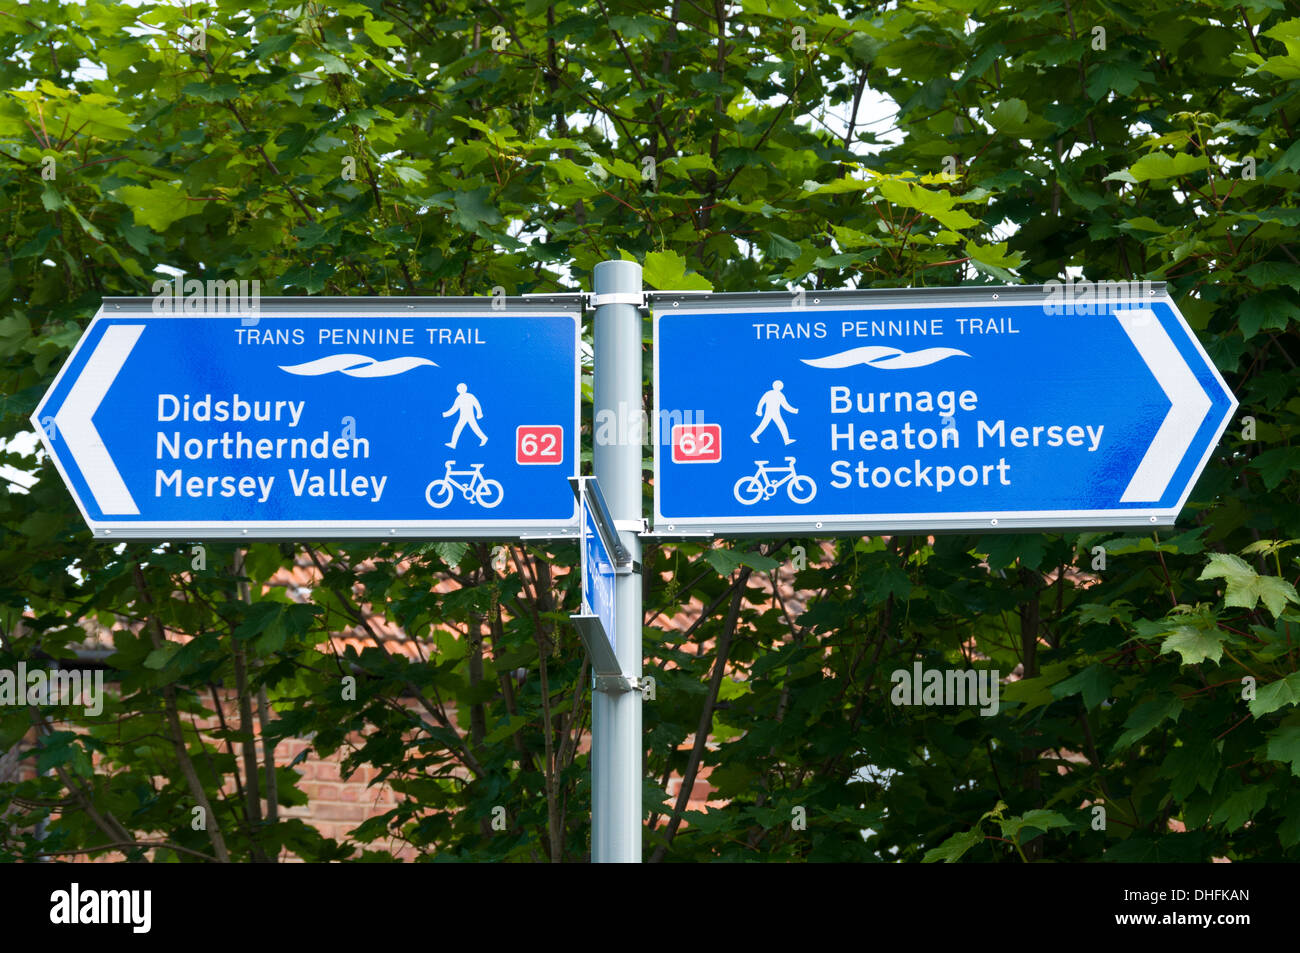 Trans Pennine Trail sign at Didsbury, Manchester, England, UK Stock Photo